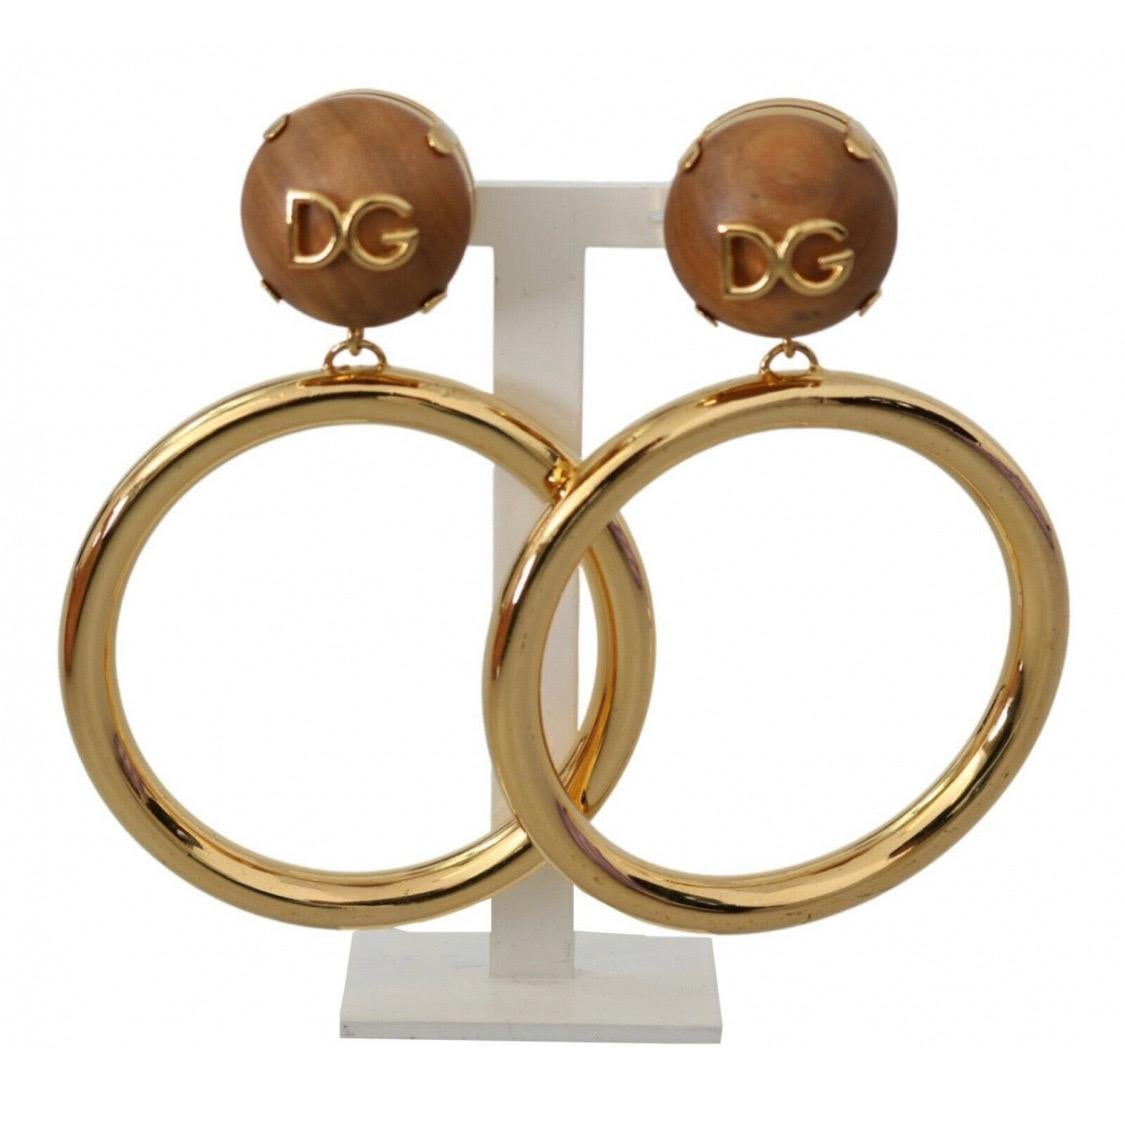 Beautiful brand new with tags, 100%
Authentic Dolce & Gabbana gold brass
hoop earrings with wooden clip on
earrings with DG logo.
Model: Clip, ring
Pattern: Logo

Material: Brass, wood 
Color: Golden

Logo details

Made in Italy

Length: 9,5